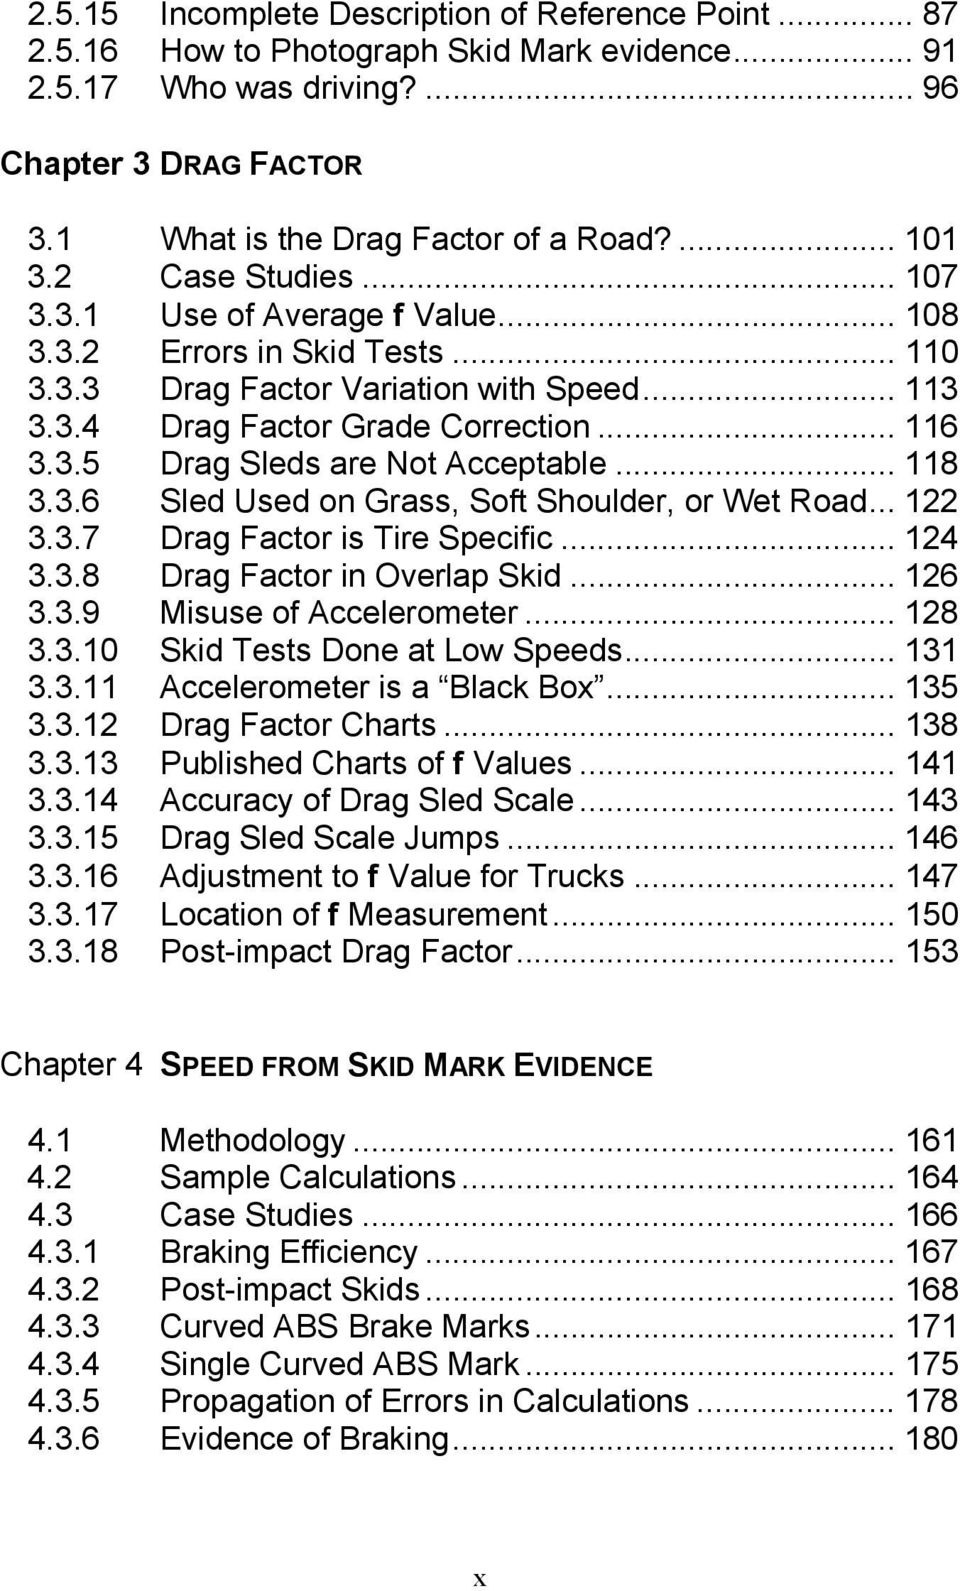 .. 118 3.3.6 Sled Used on Grass, Soft Shoulder, or Wet Road... 122 3.3.7 Drag Factor is Tire Specific... 124 3.3.8 Drag Factor in Overlap Skid... 126 3.3.9 Misuse of Accelerometer... 128 3.3.10 Skid Tests Done at Low Speeds.